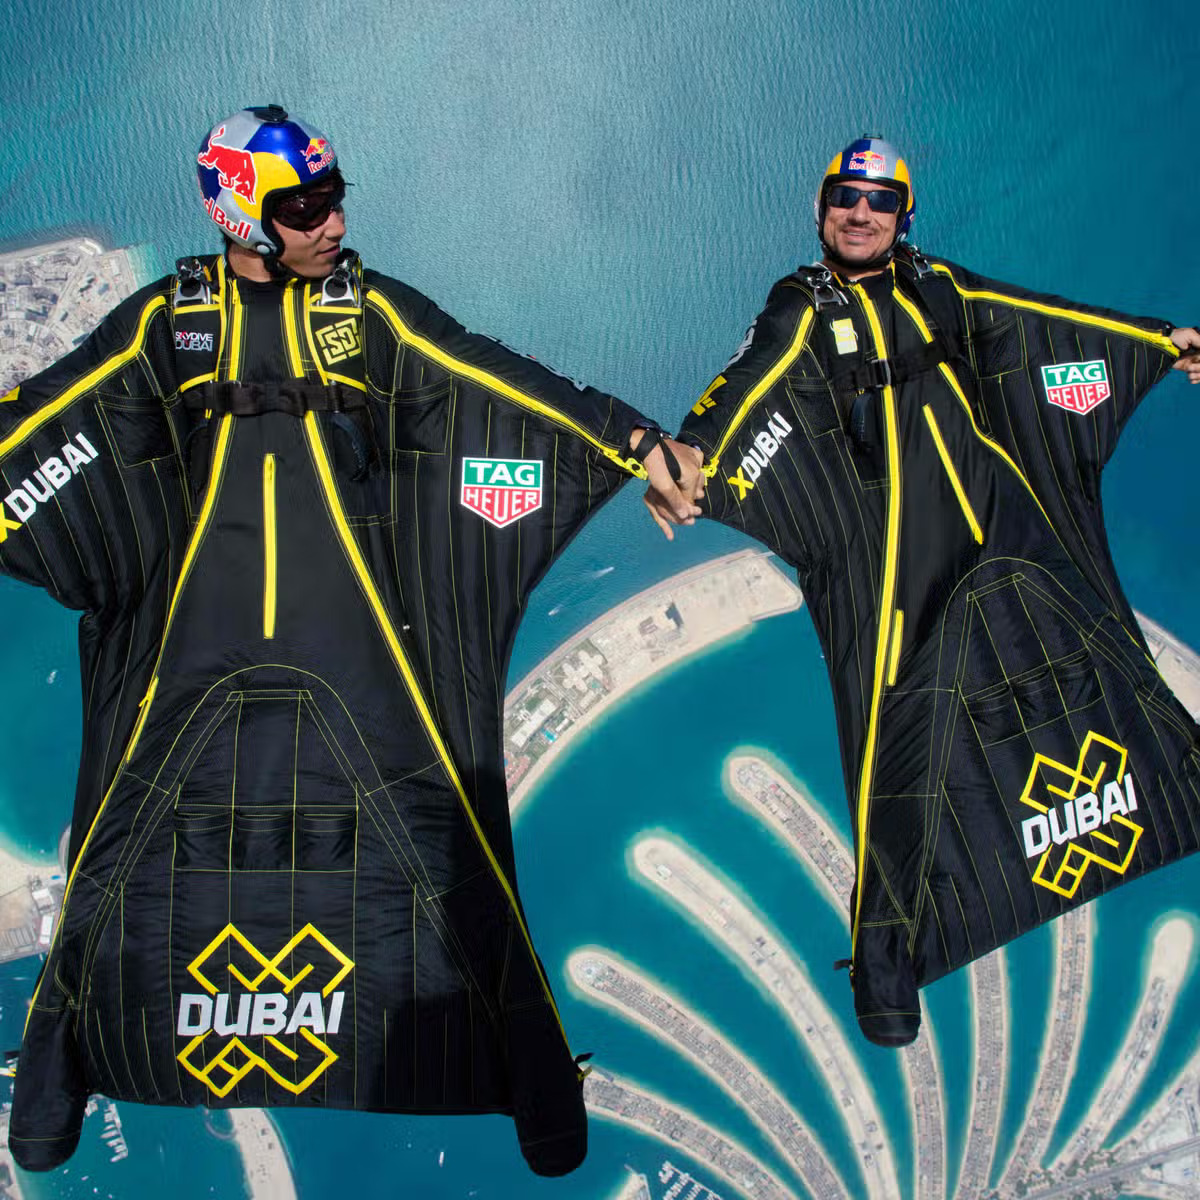 Pilot Faces Manslaughter Charges After Wingsuit Daredevil Was Decapitated In Mid-air Collision